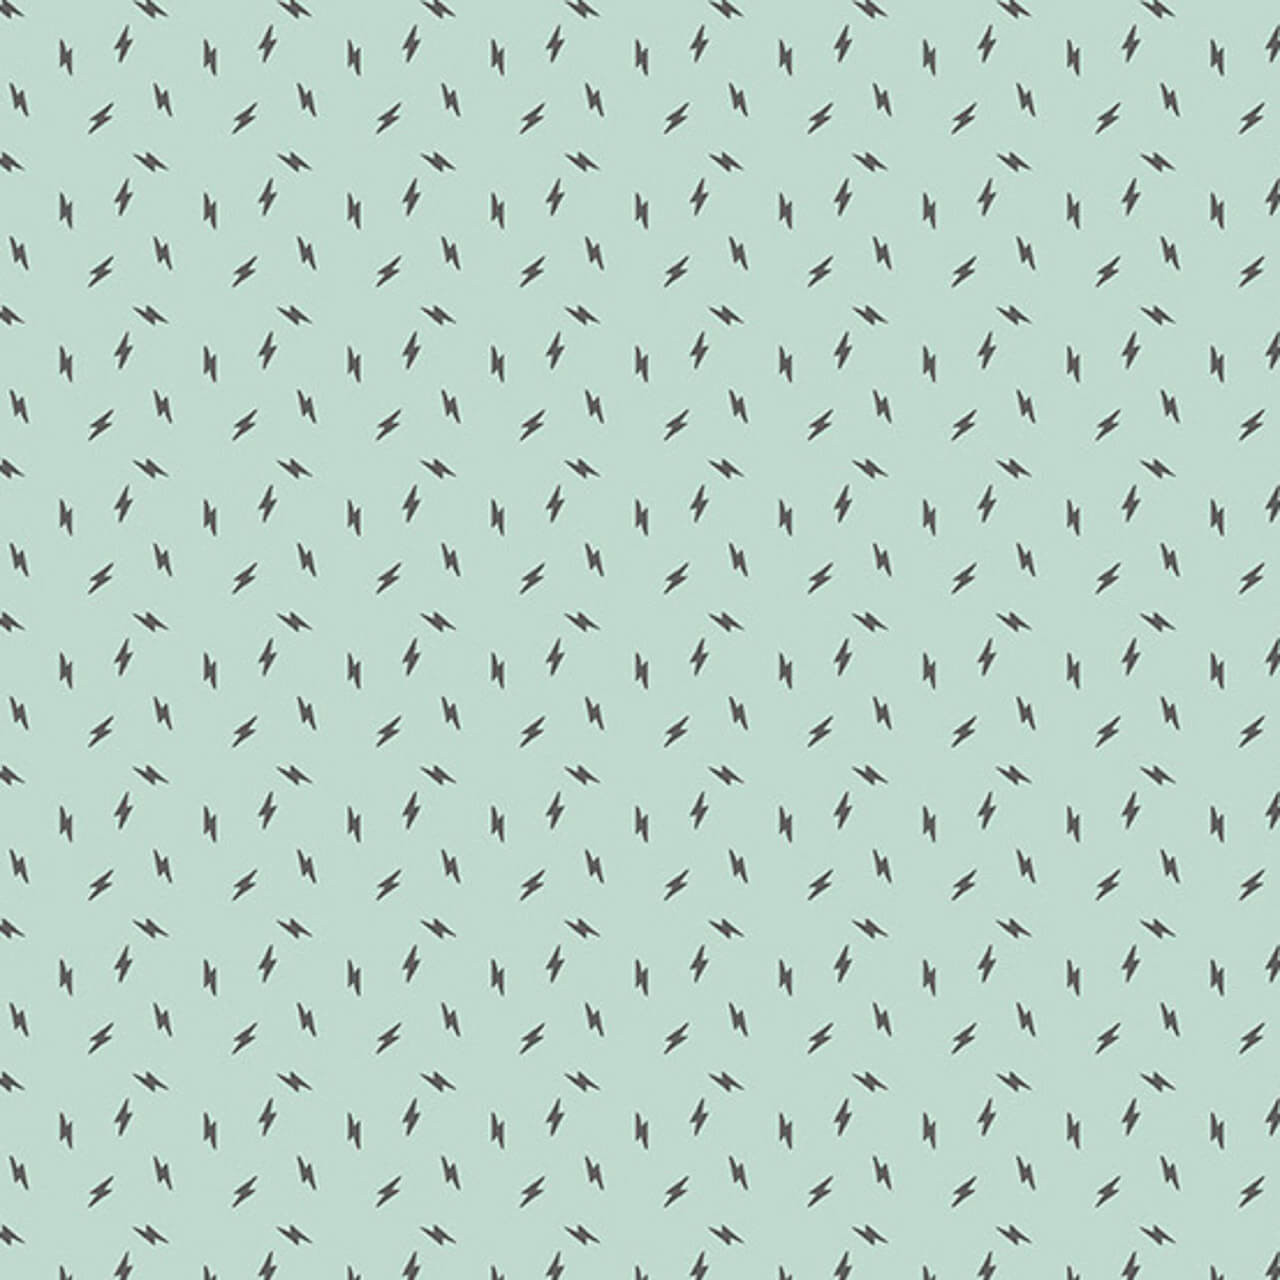 Unveiling the Atomic in Sea Glass Fabric - features tiny lightening bolts arranged over a pale turquoise background